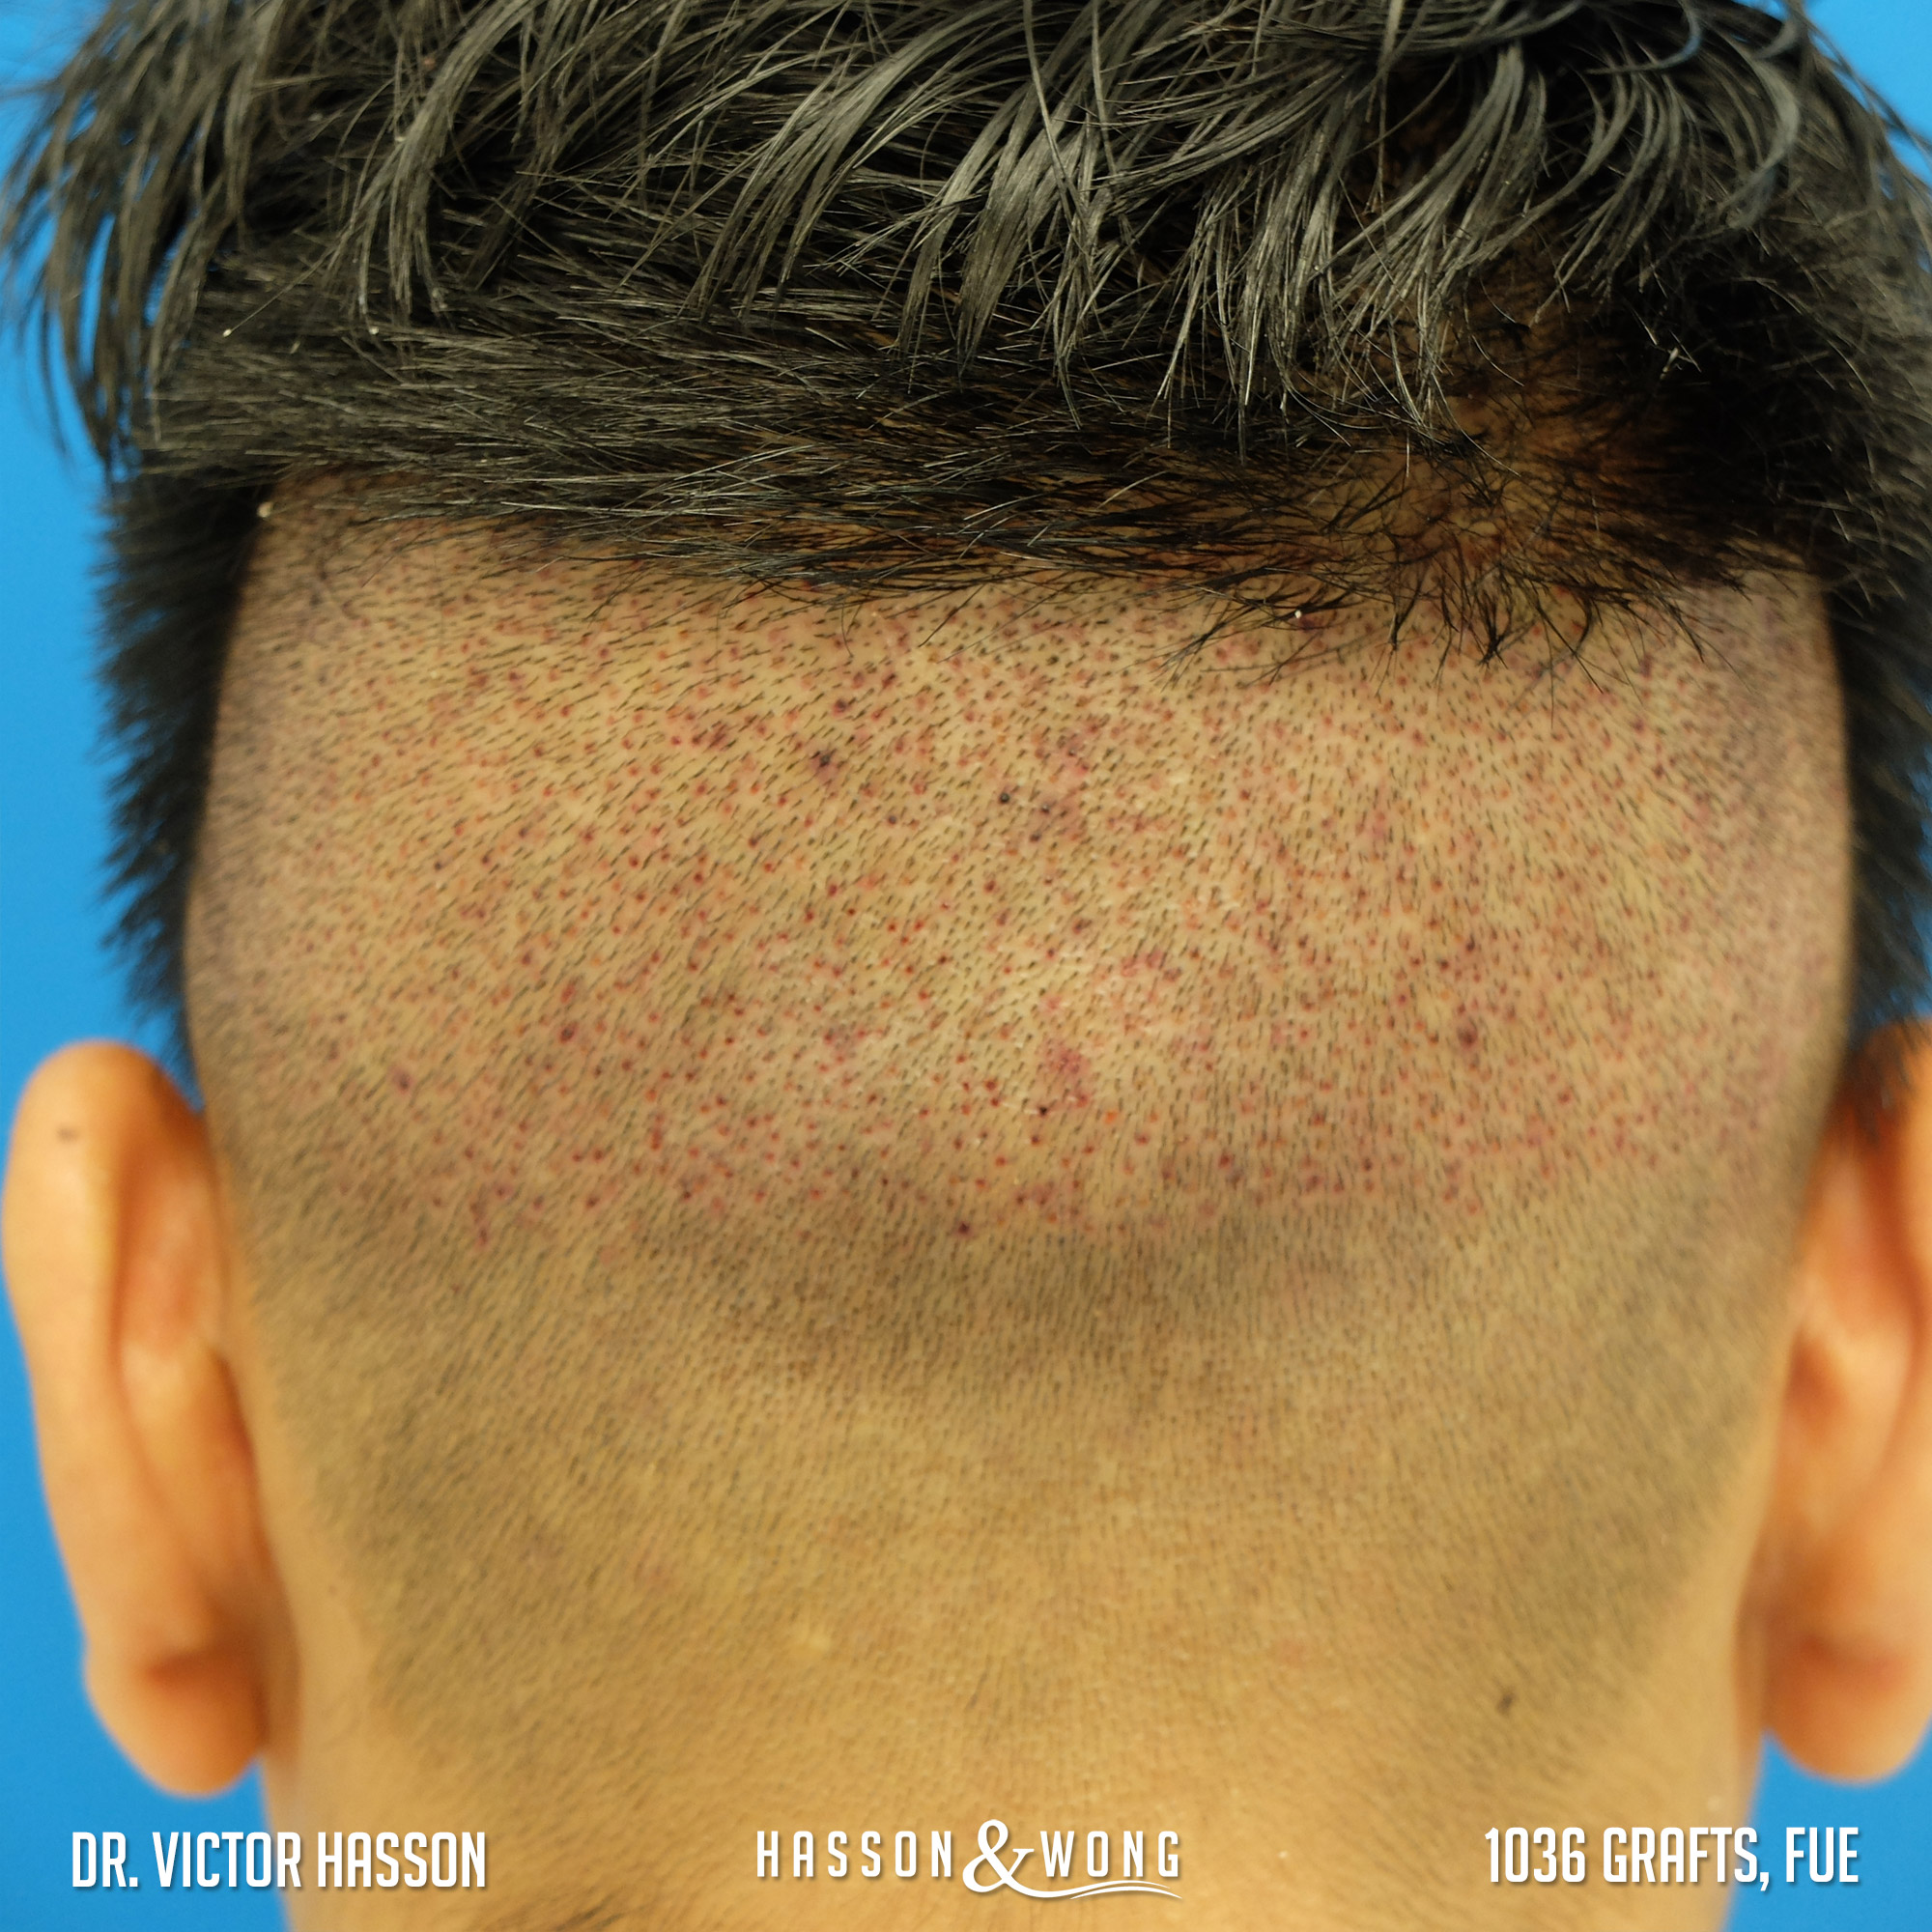 FUE Hair Transplant Timeline - Hasson & Wong